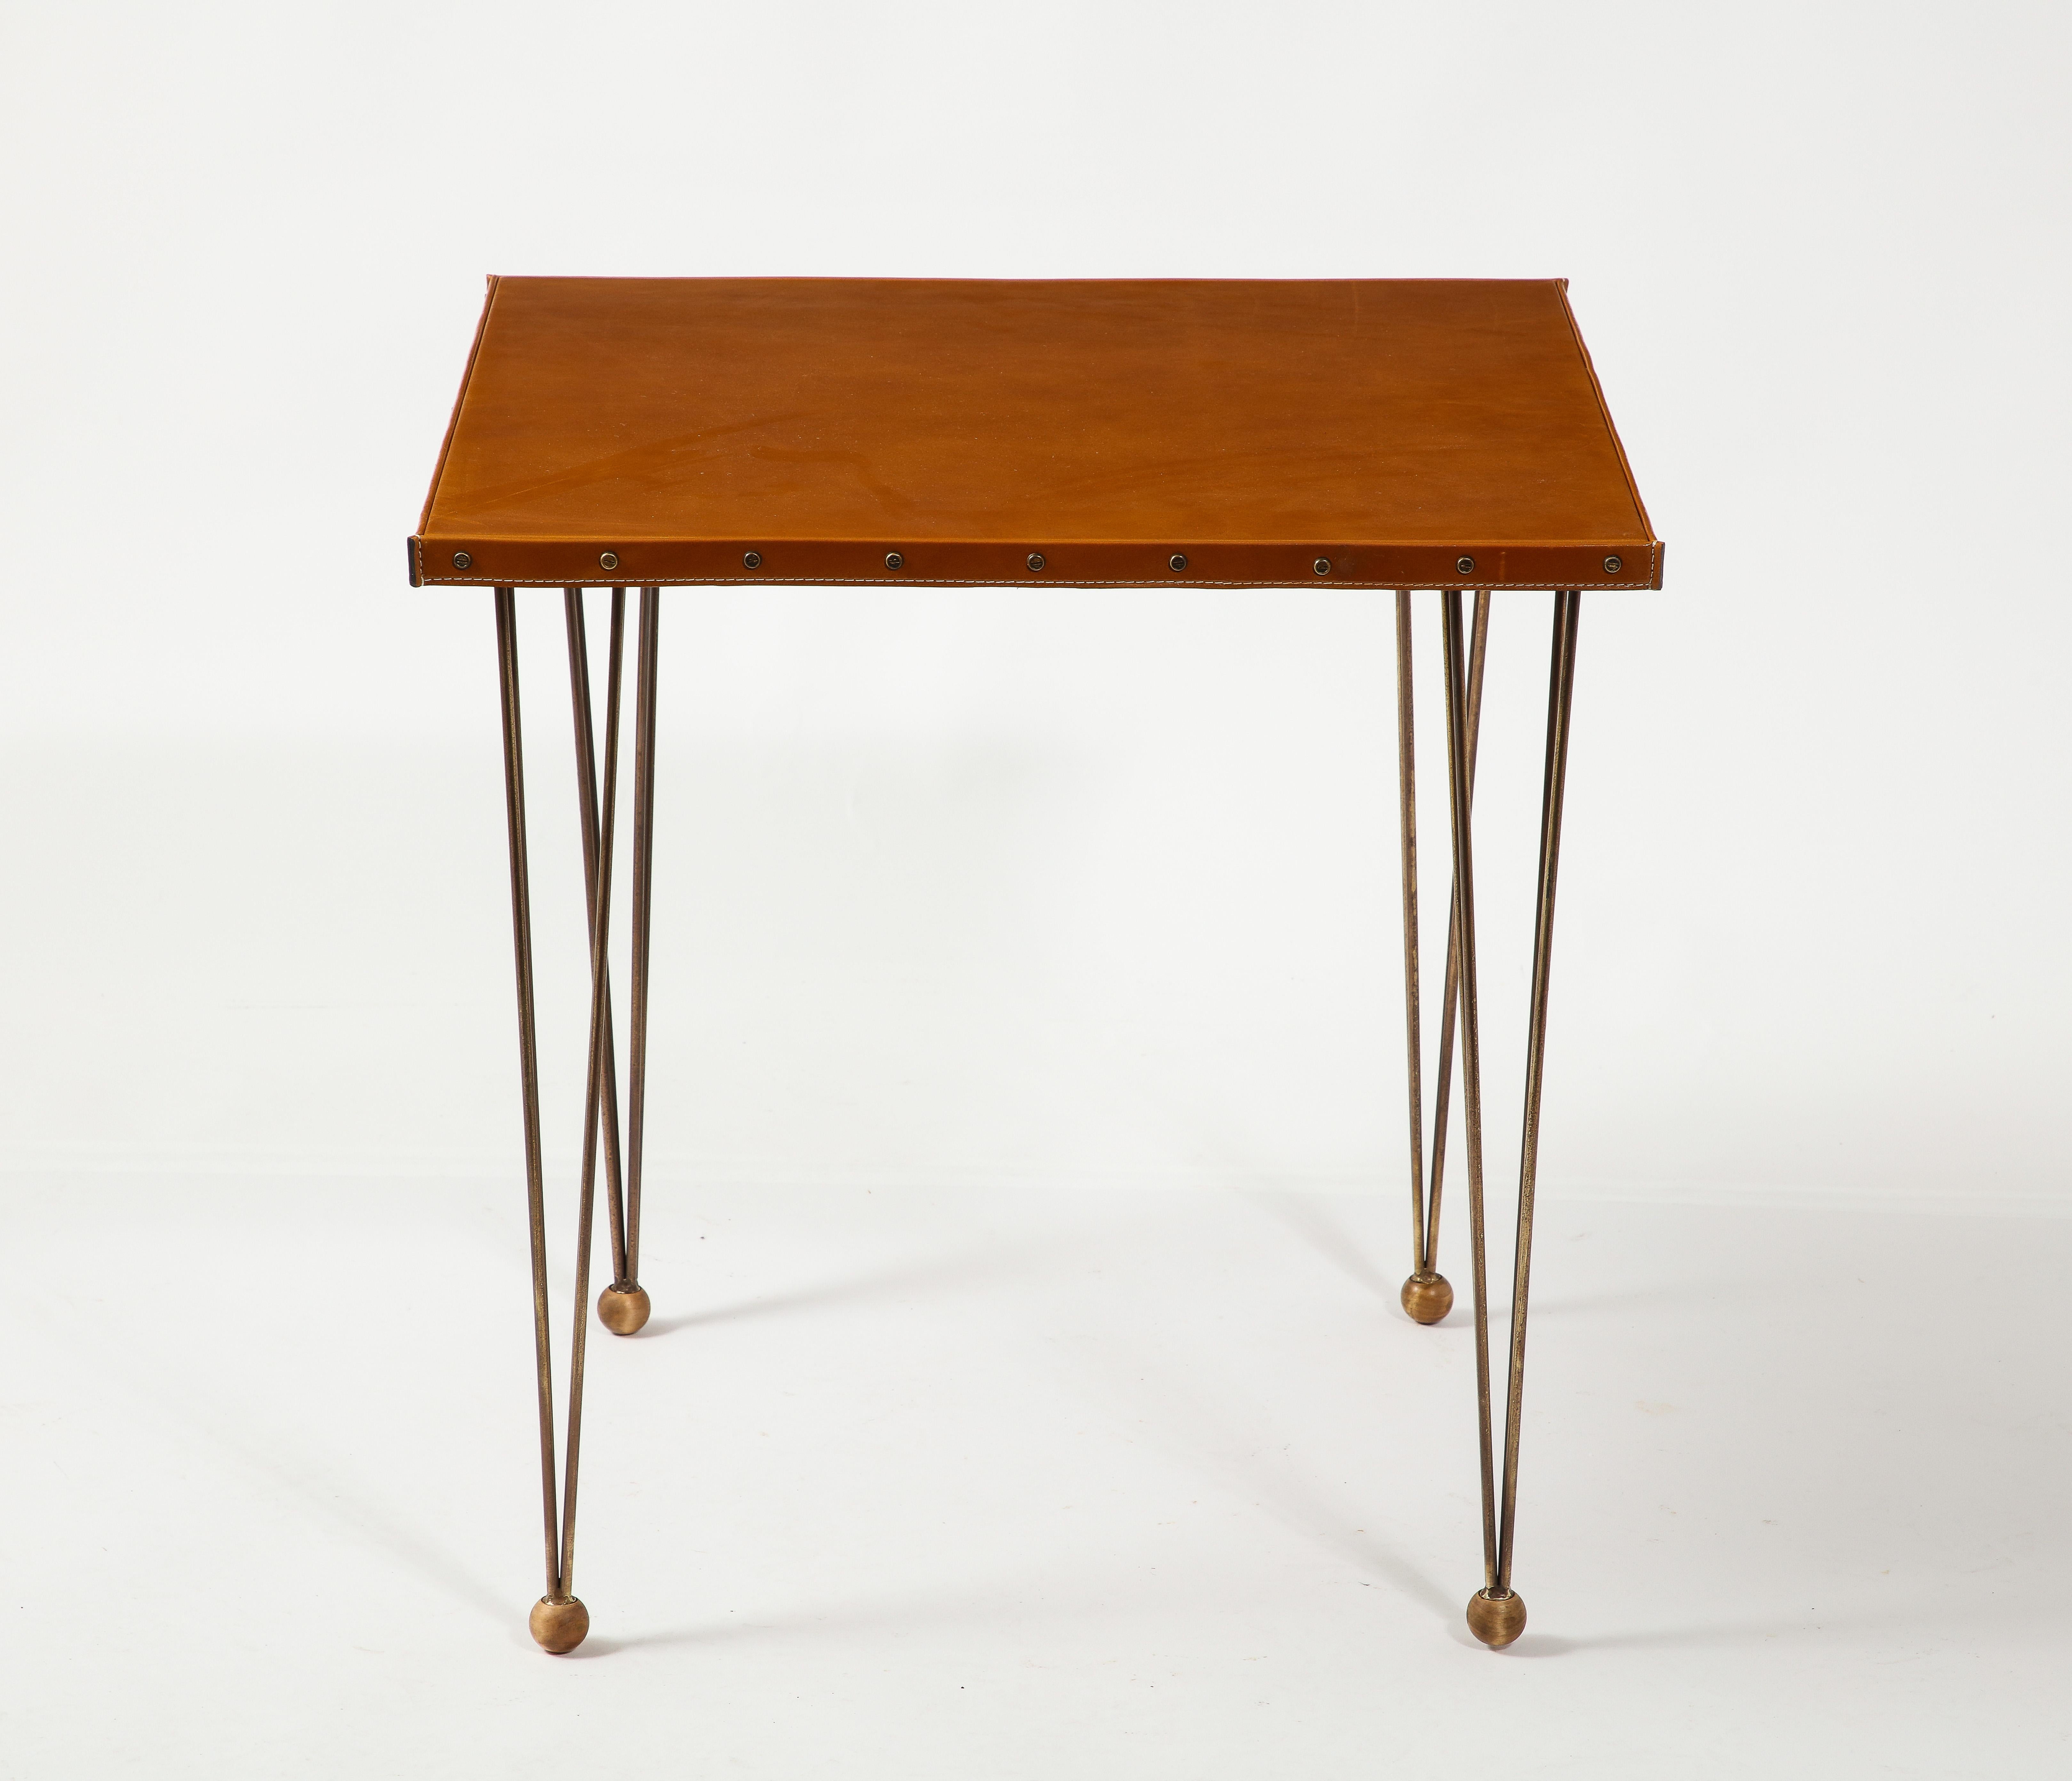 
Large end table in stitched leather and patinated brass, the legs end on walnut balls and the tops have brass screws holding the trims.
